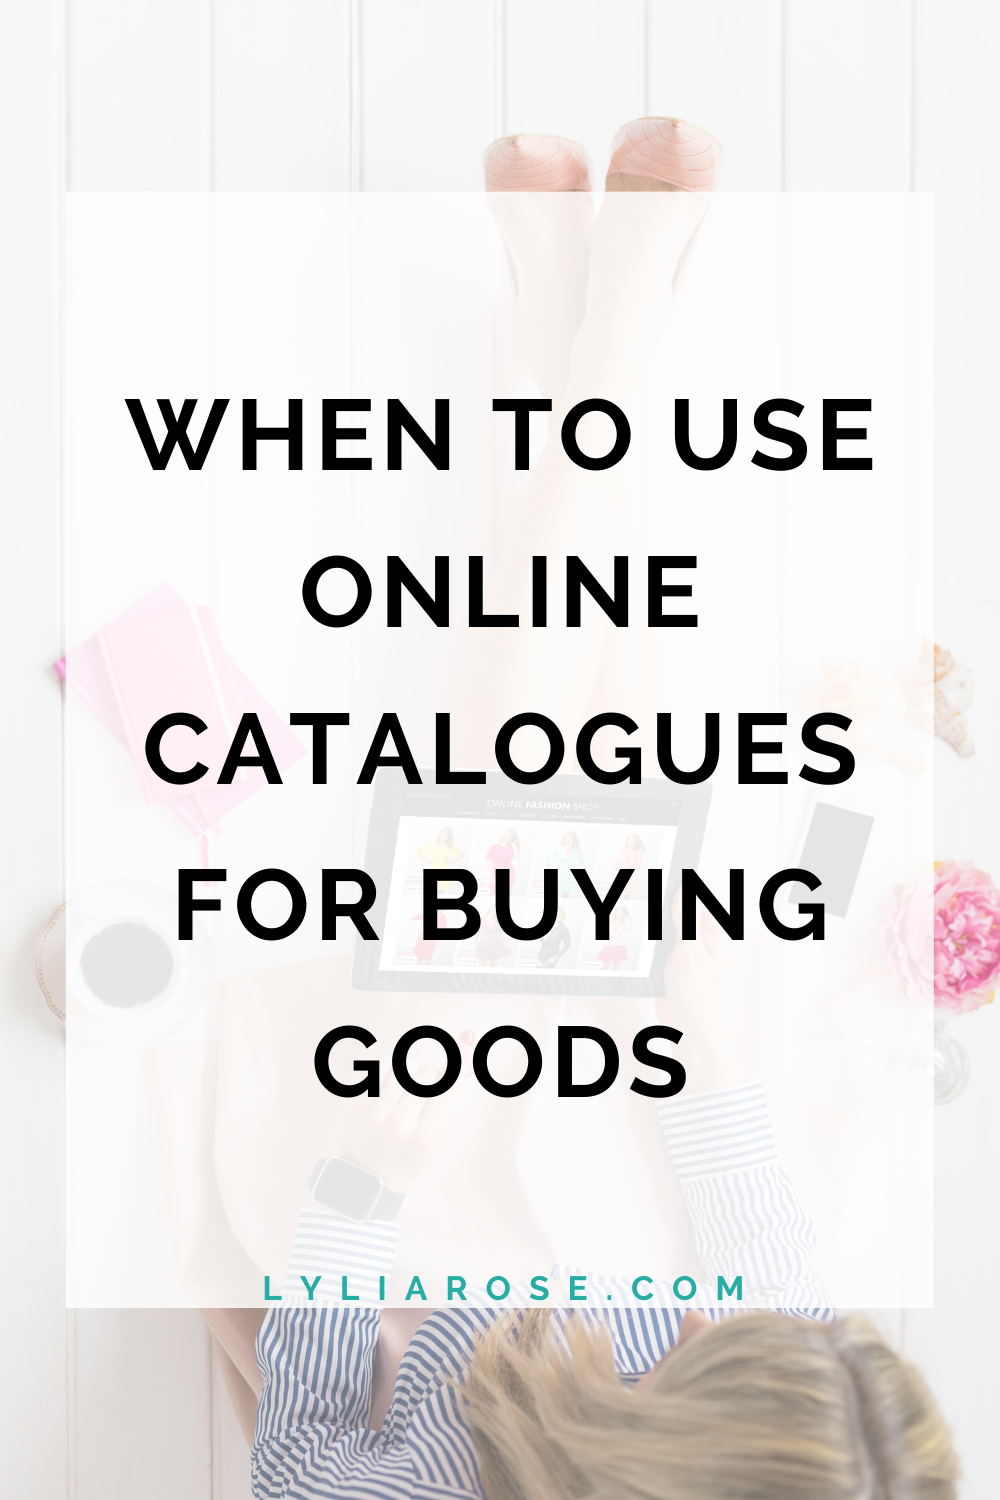 When to use online catalogues for buying goods